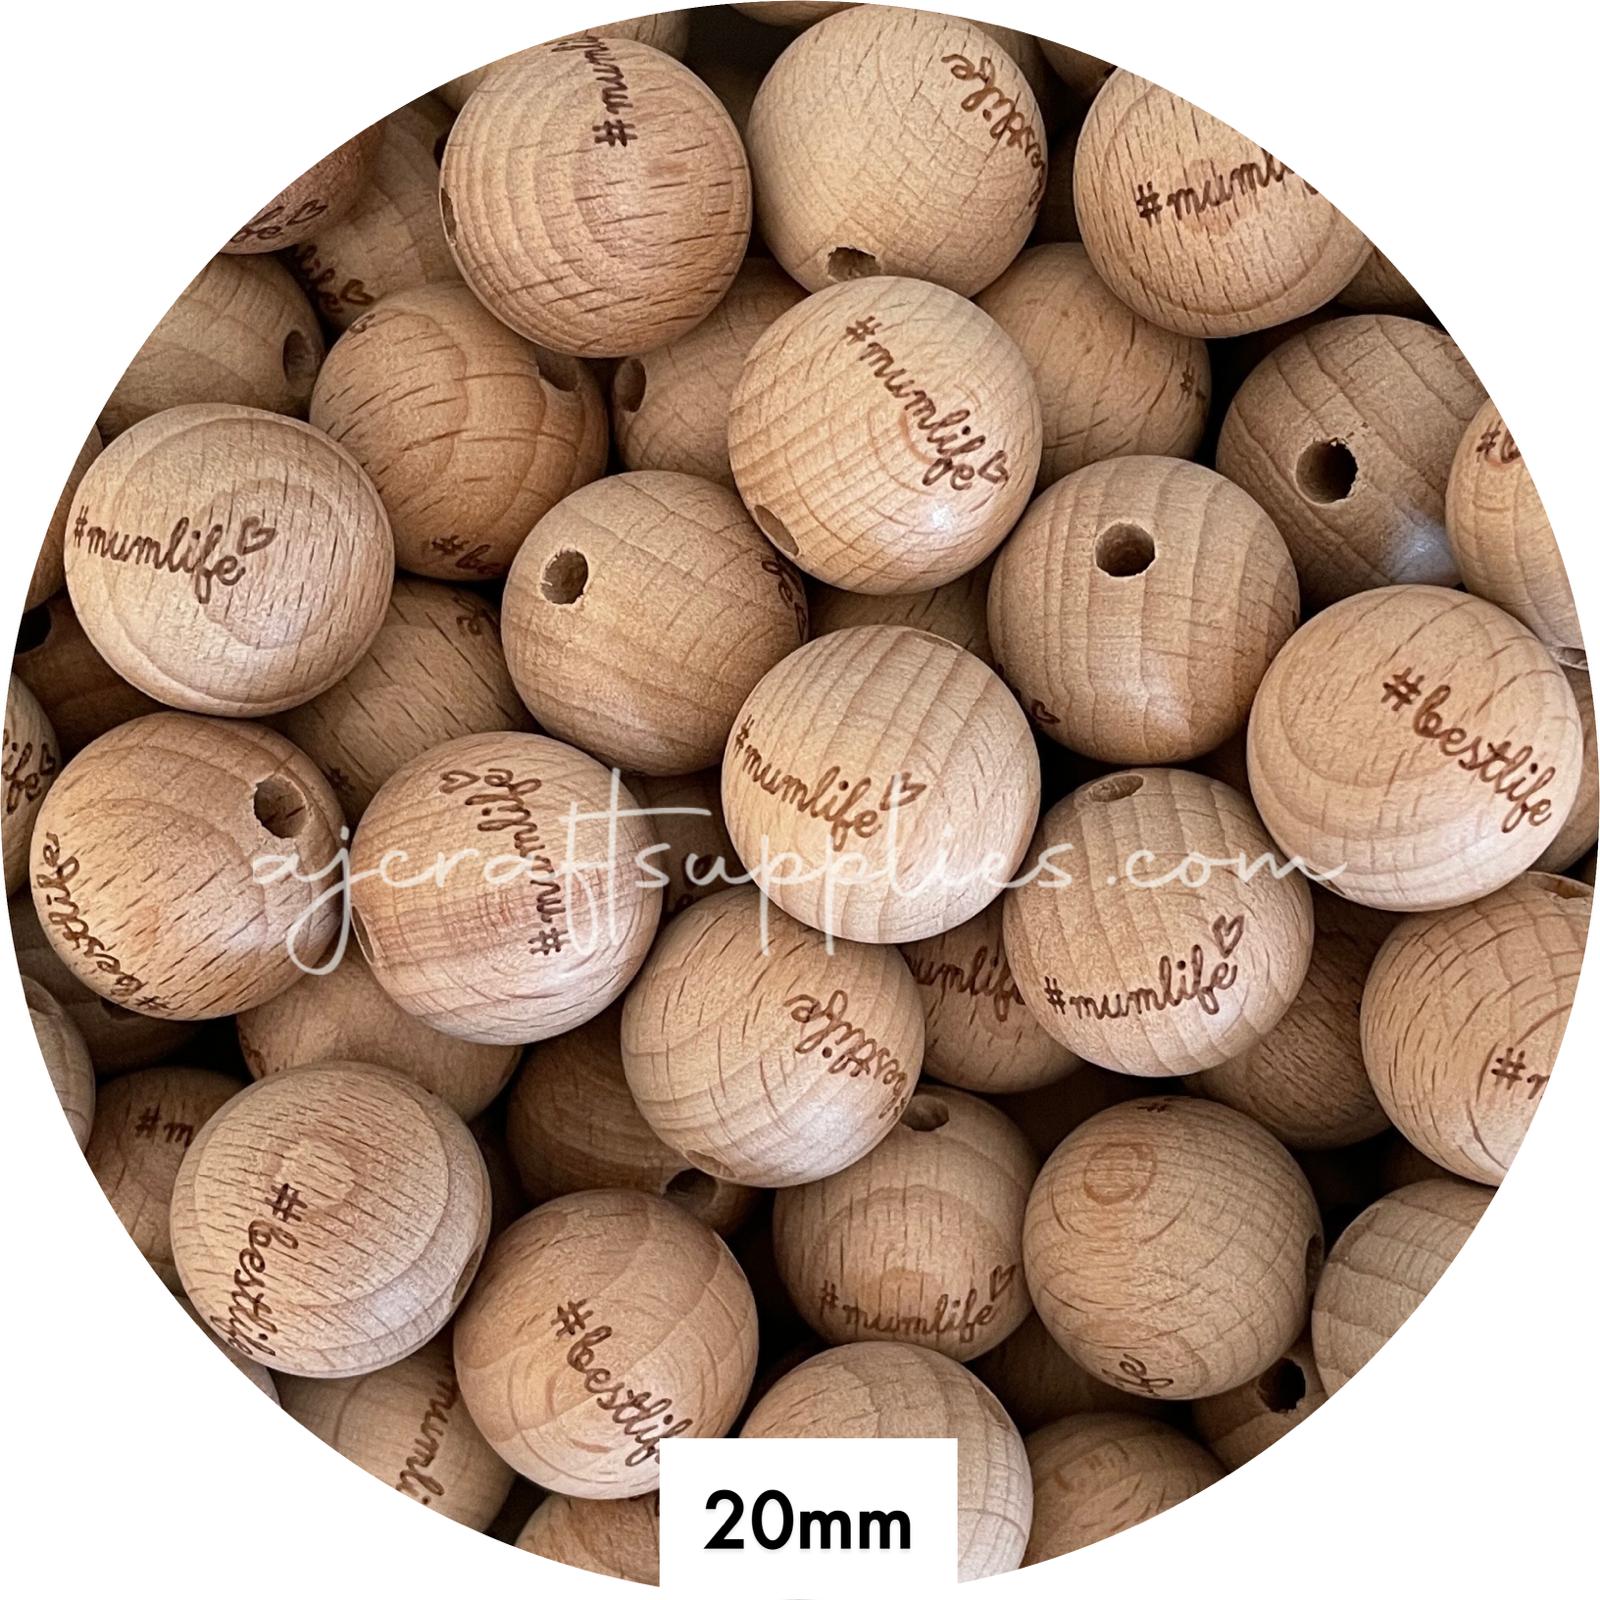 Beech Wood Engraved Beads (Mumlife Bestlife) - 20mm Round - 5 beads (Limited Edition)